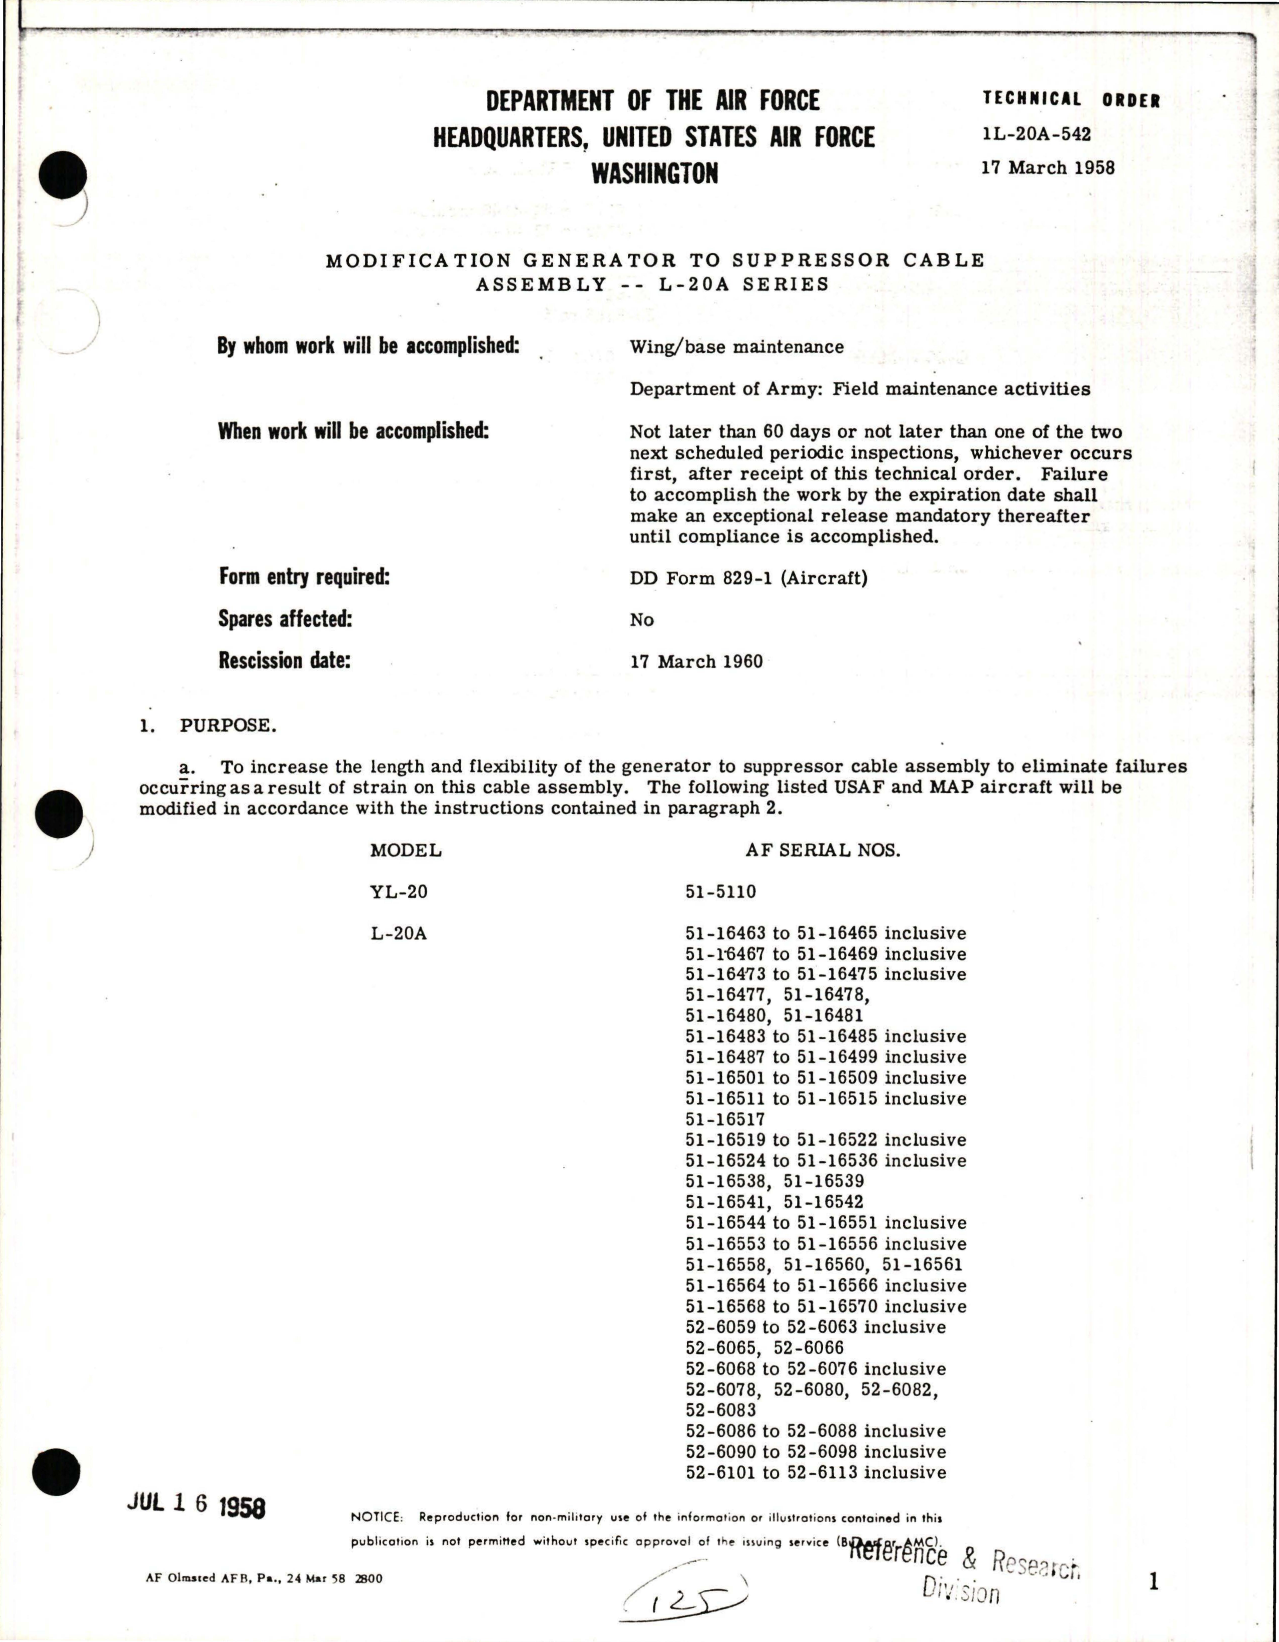 Sample page 1 from AirCorps Library document: Modification Generator to Suppressor Cable Assembly - L-20A Series